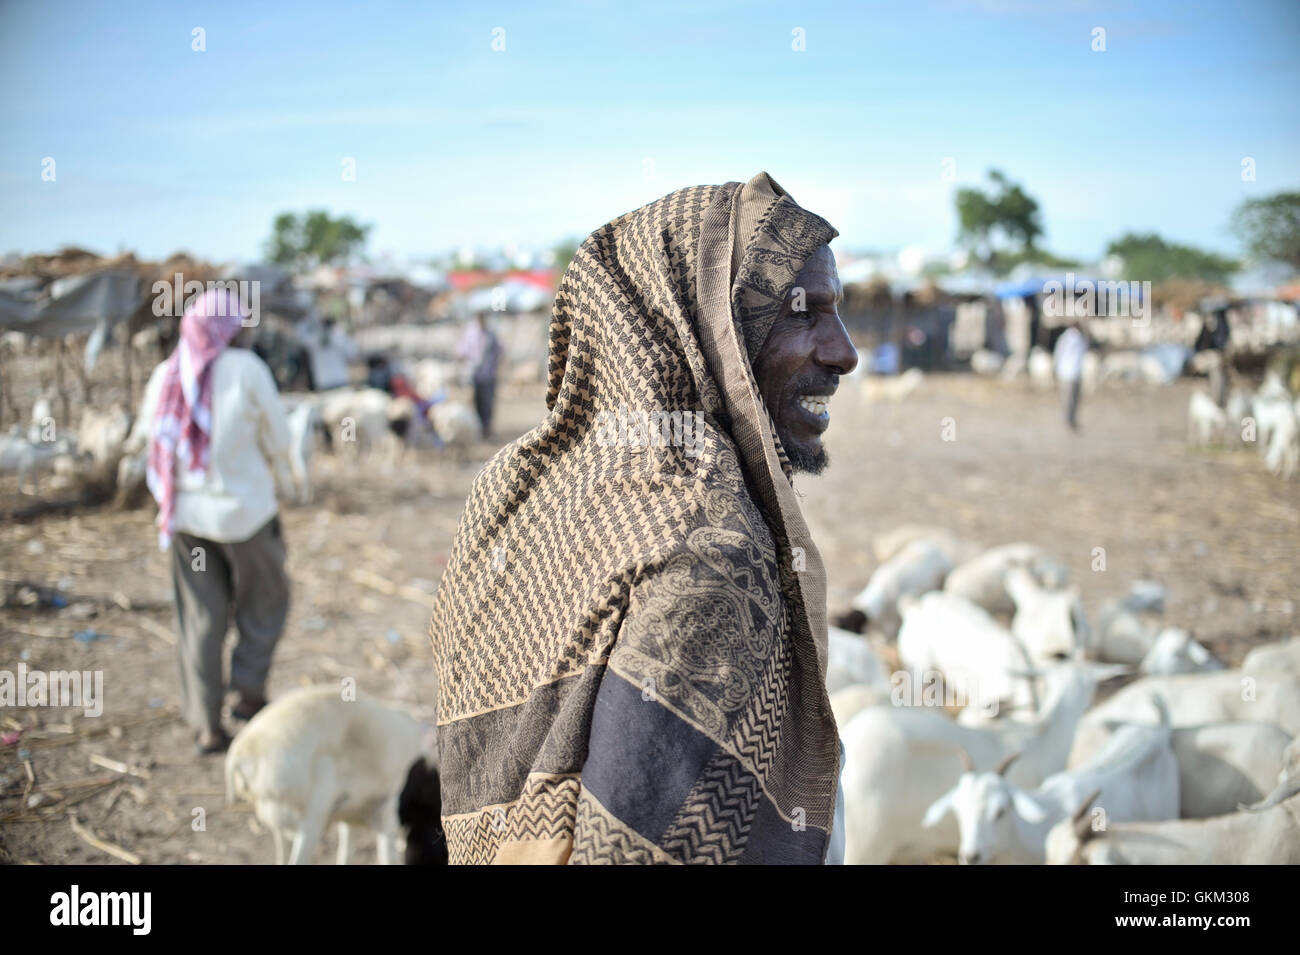 A Somali man stands next to his herd of goats at Bakara Animal Market in Mogadishu, Somalia, on April 13. Once notorious for being both the site of Black Hawk Down, in which 18 American soldiers were killed in 1993, and later as an al-Shabaab stronghold, Bakara market is now slowly losing its past notoriety and becoming better known for its thriving economy. In the district's animal market, thousands of goats are now brought each morning, where they are sold on to later be slaughtered for their meat. AU UN IST PHOTO / TOBIN JONES. Stock Photo